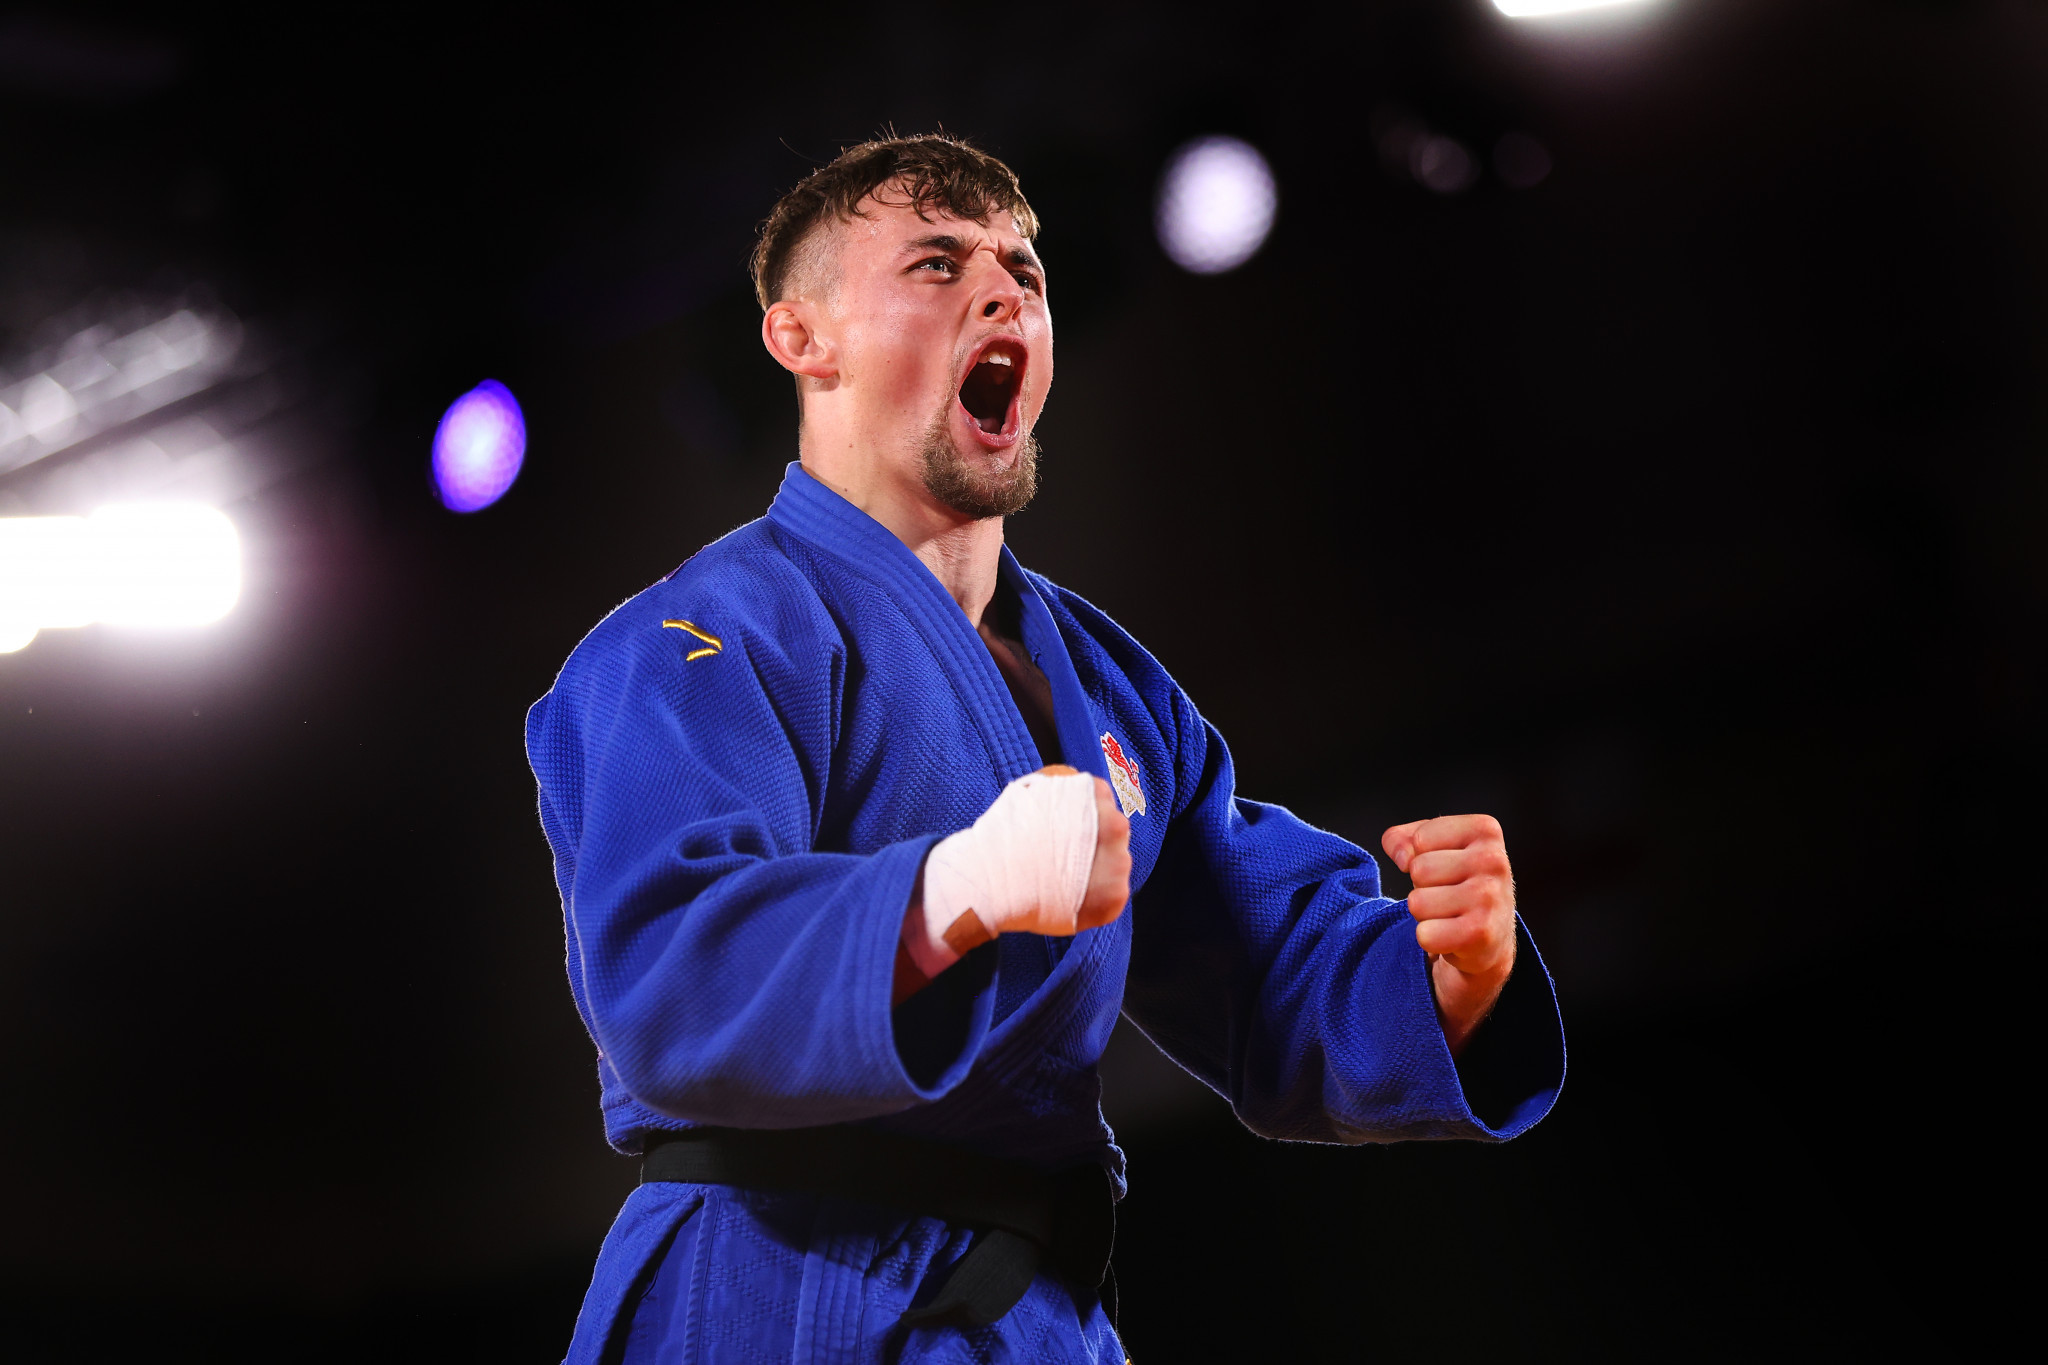 Powell and Moorhead take judo titles for England at Birmingham 2022